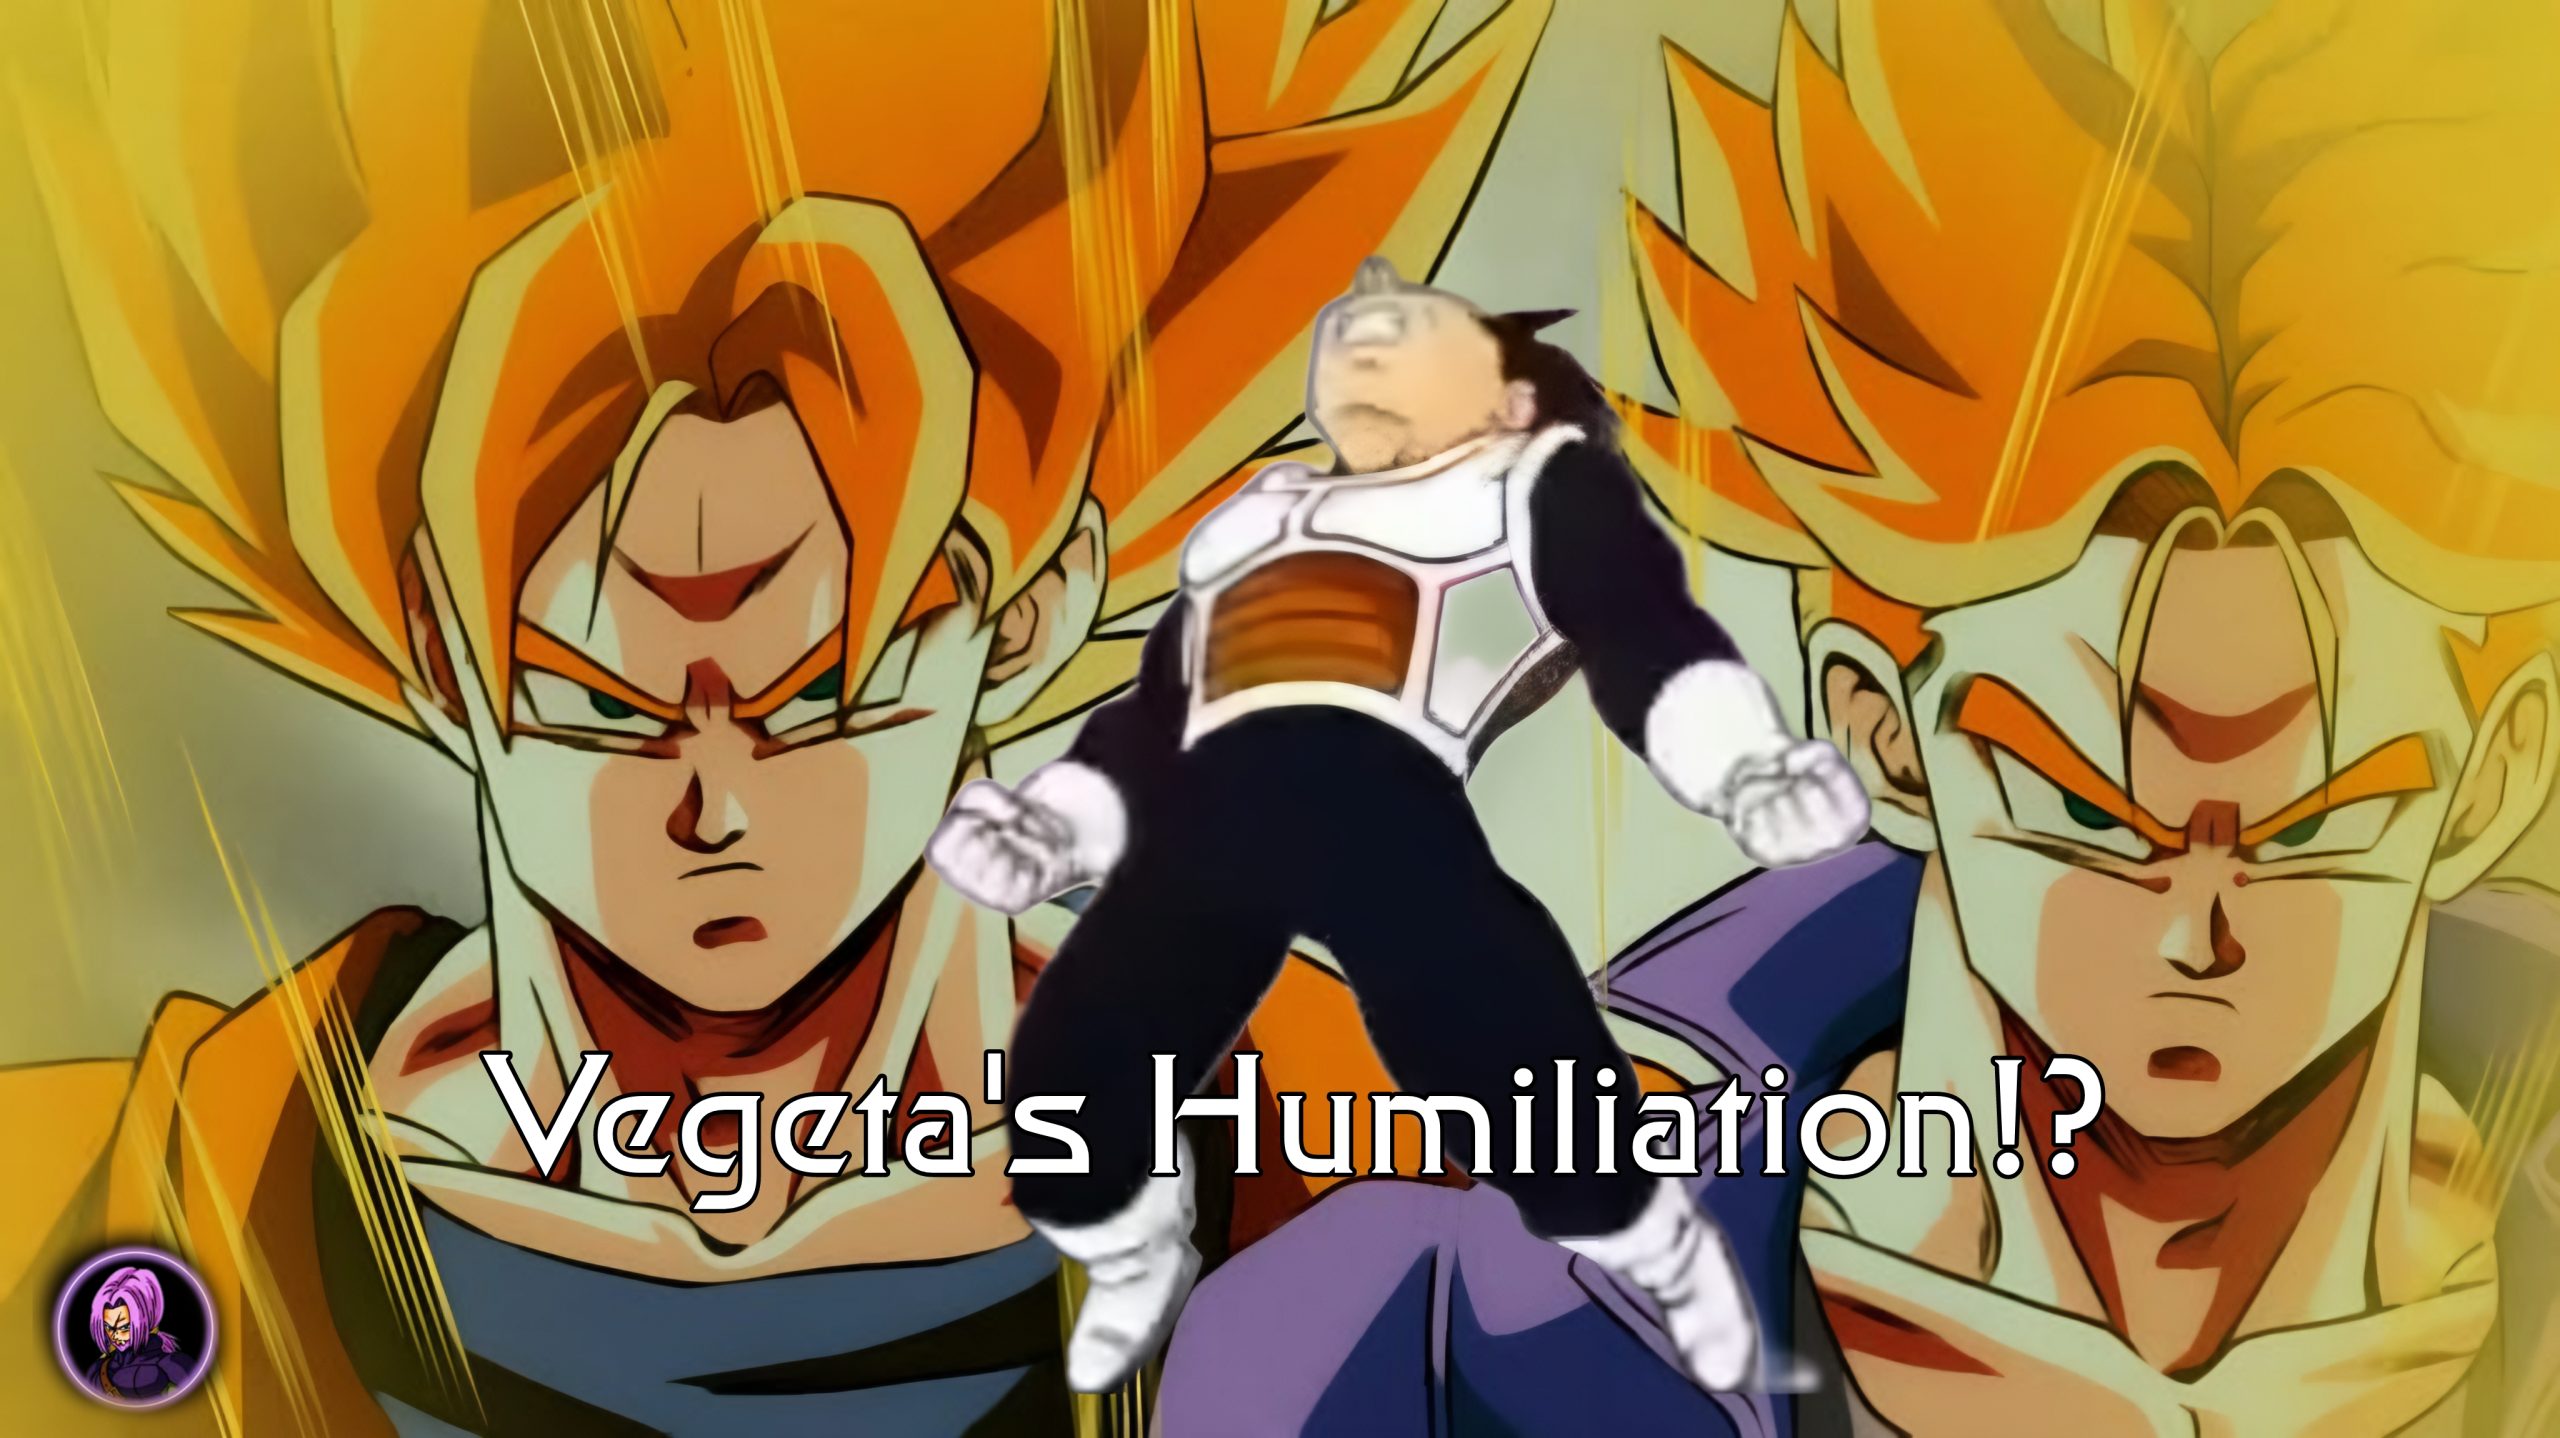 Vegeta’s Humiliation (What if Parallel Quest)